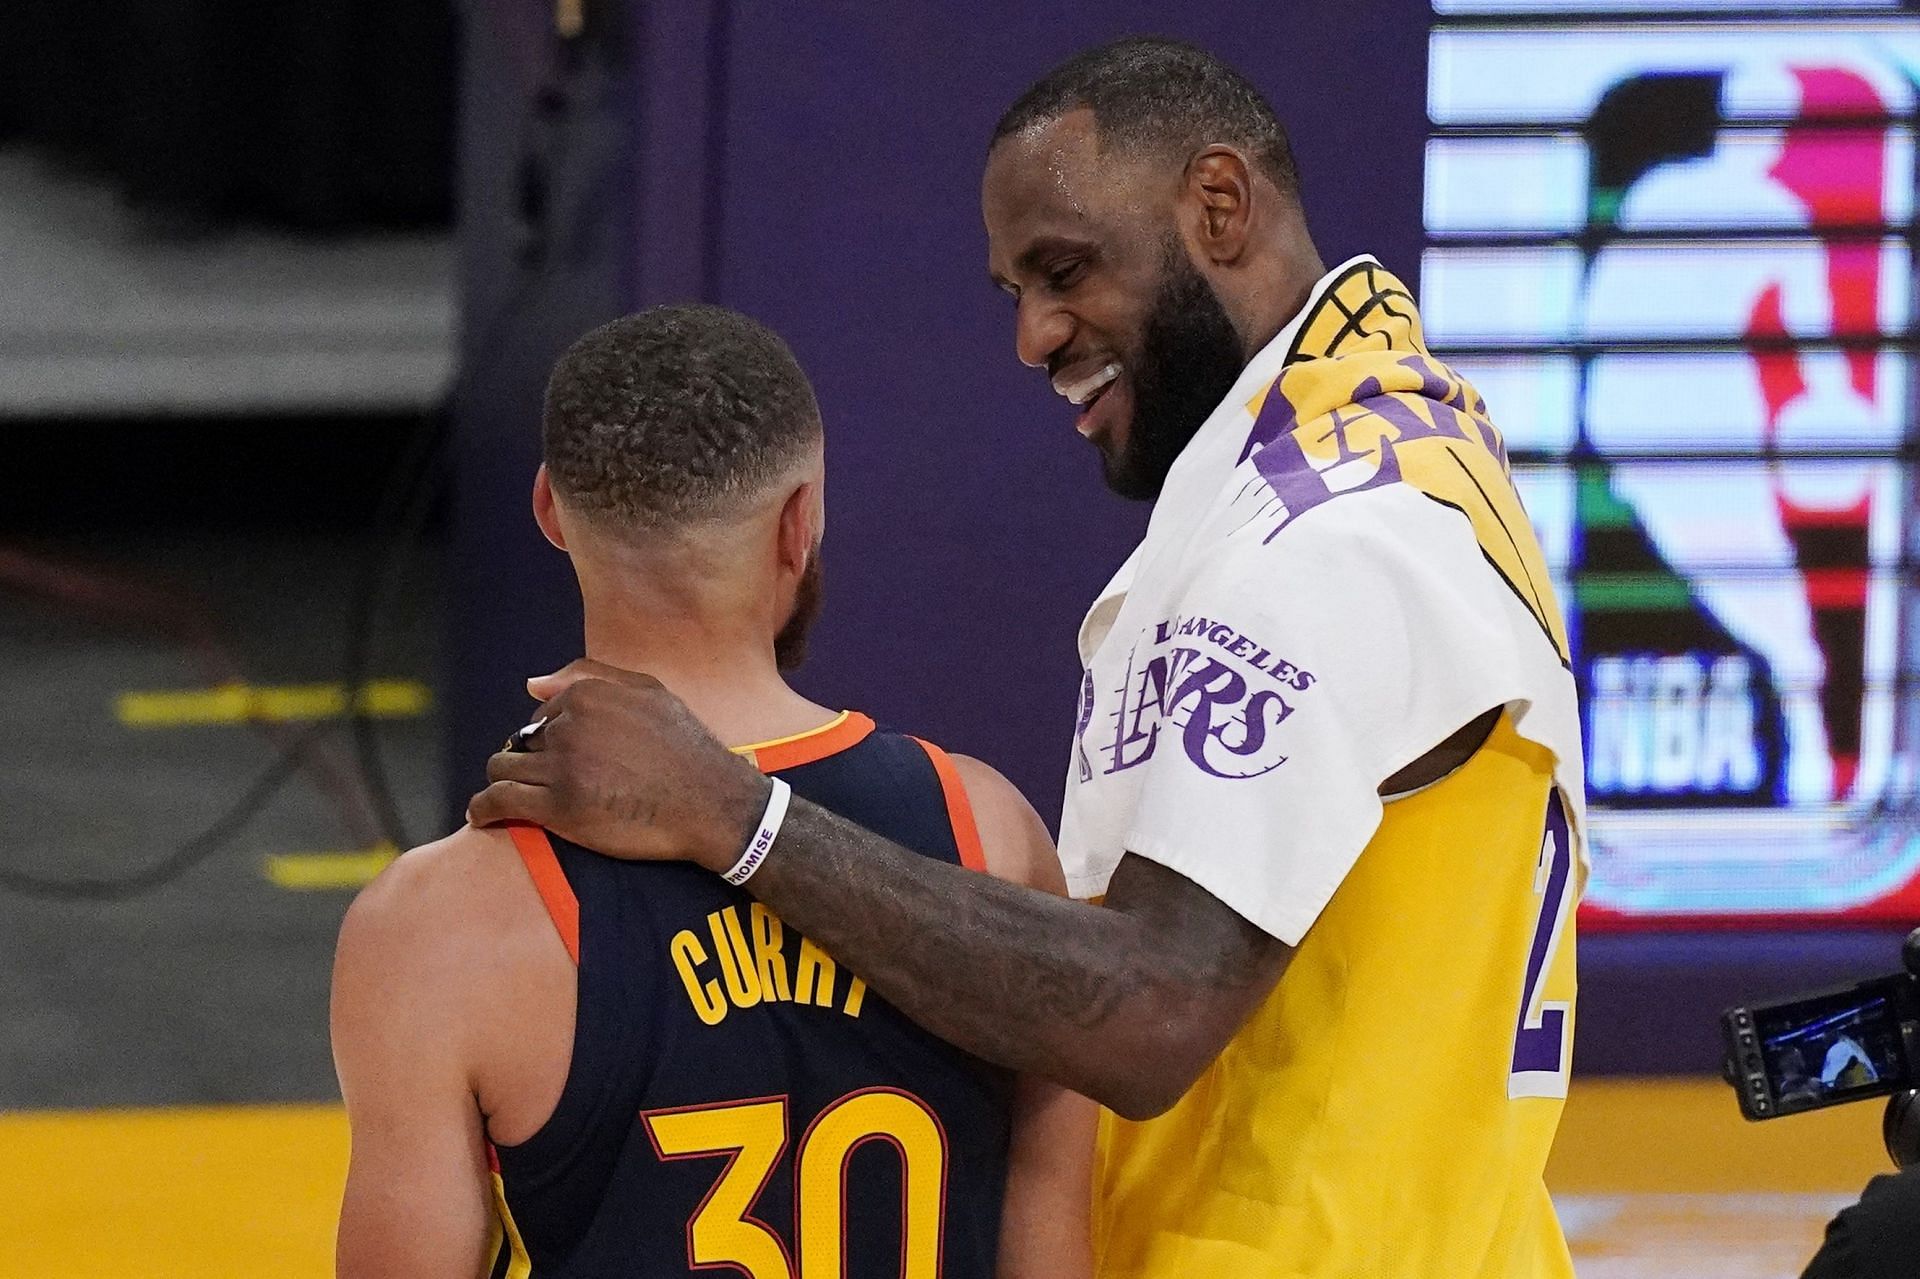 LeBron James has given the ultimate praise to Steph Curry as the Golden State Warriors superstar is about to break the all-time record in three-point shots made [Photo: Bleacher Report]